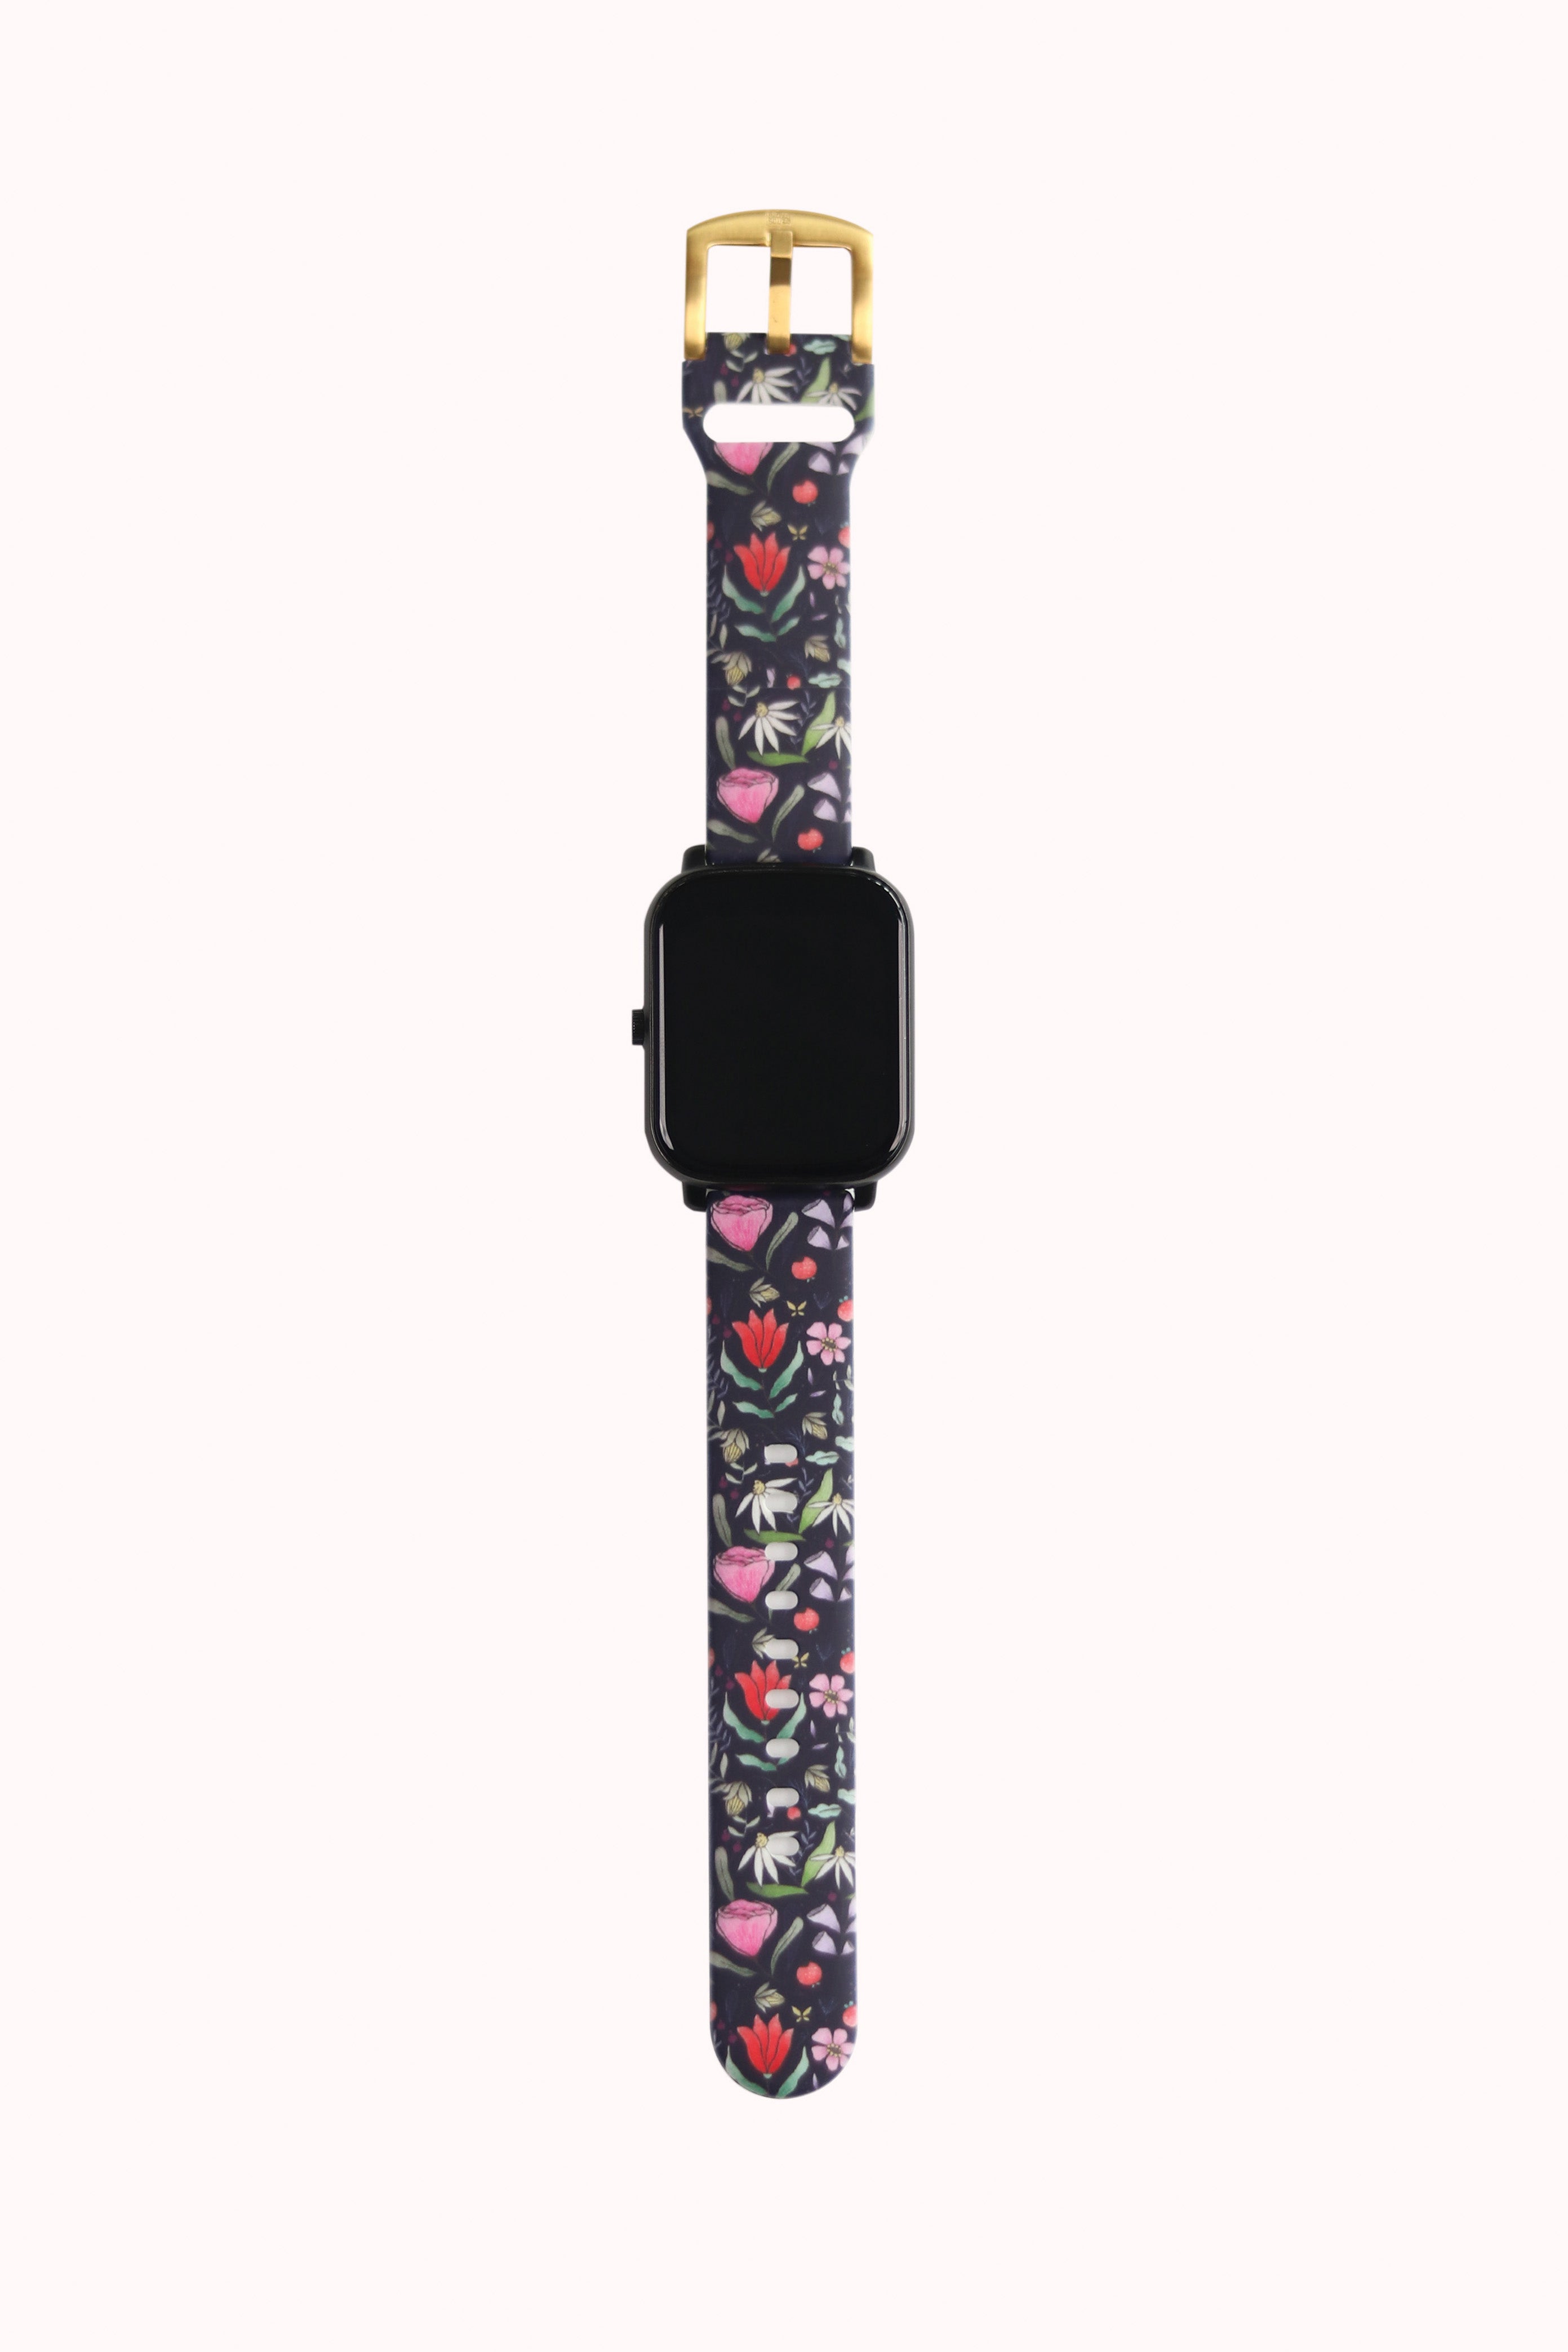 Flower Apple Watch Wallpaper Graphic by larisaetsy · Creative Fabrica